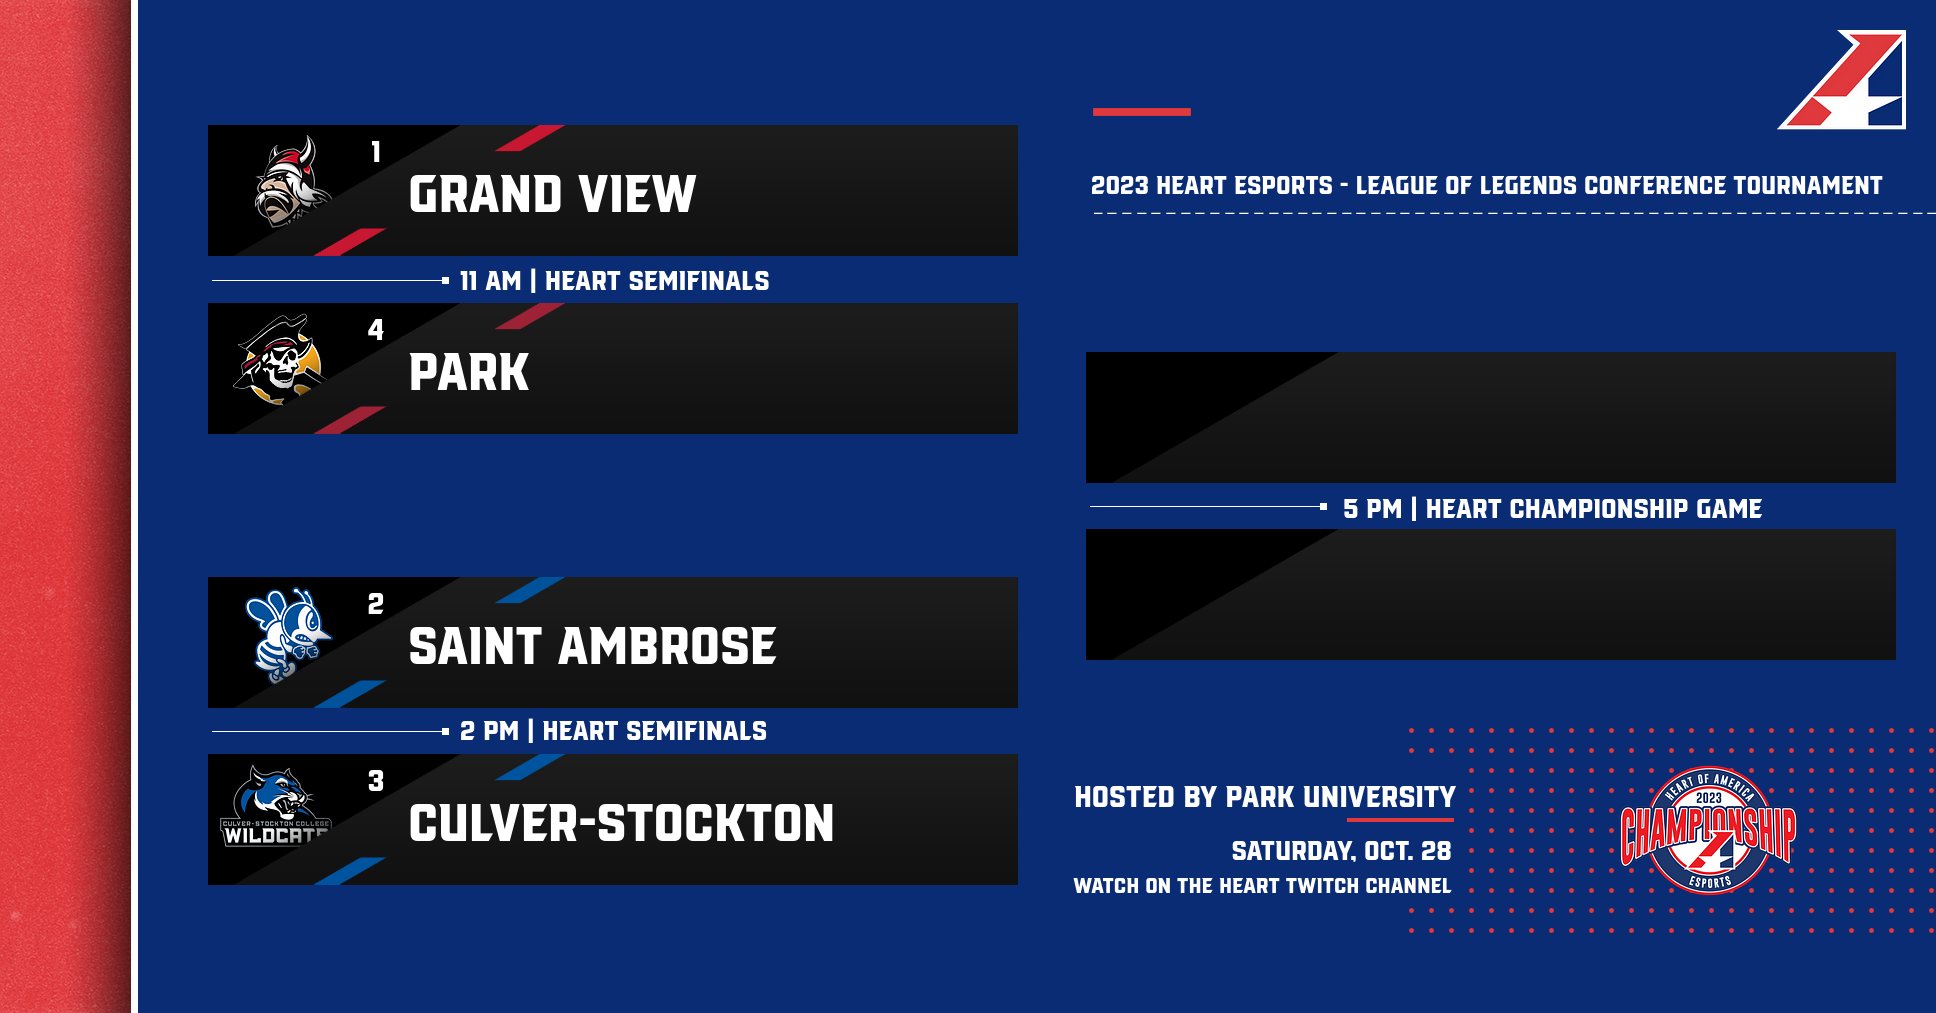 SAU to face Culver-Stockton in first round of Heart League of Legends Conference Tournament